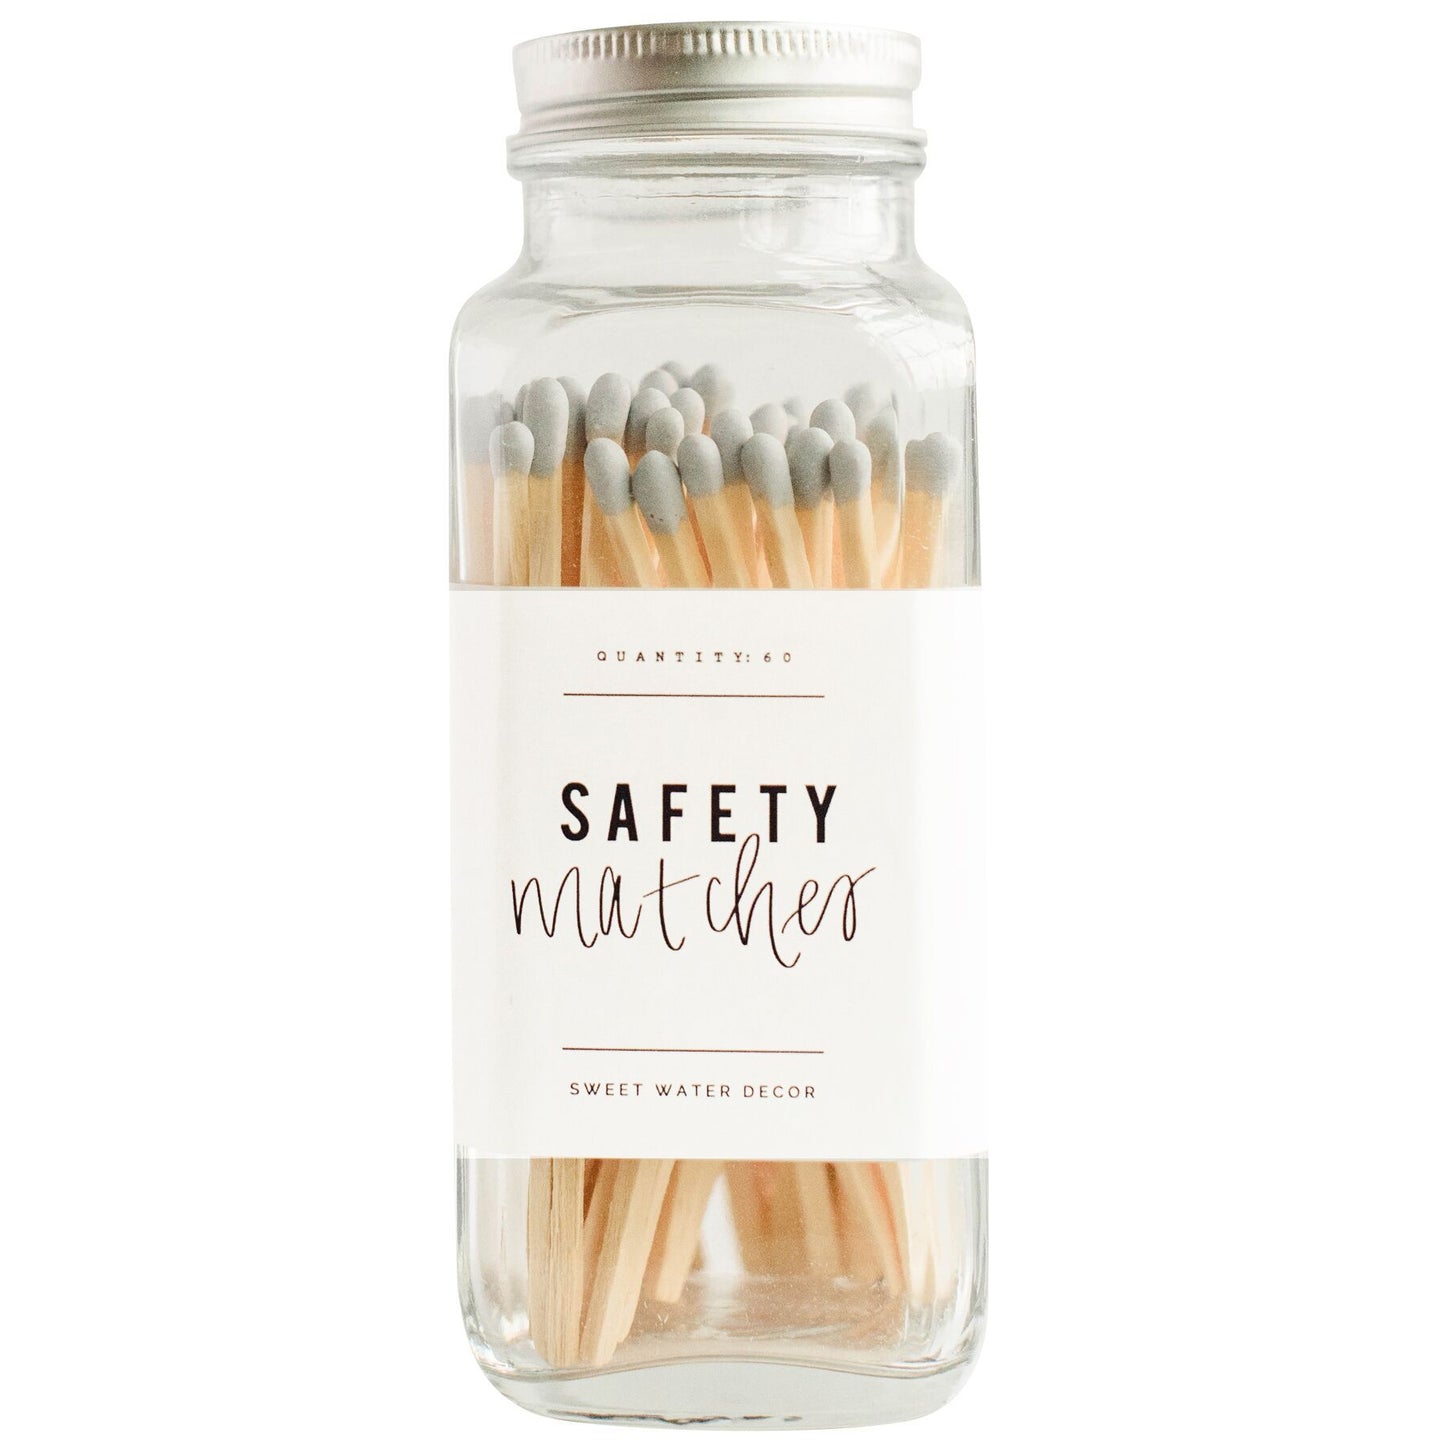 Safety Matches - Gray Tip - 60 Count, 3.75" - Hometown Refuge 